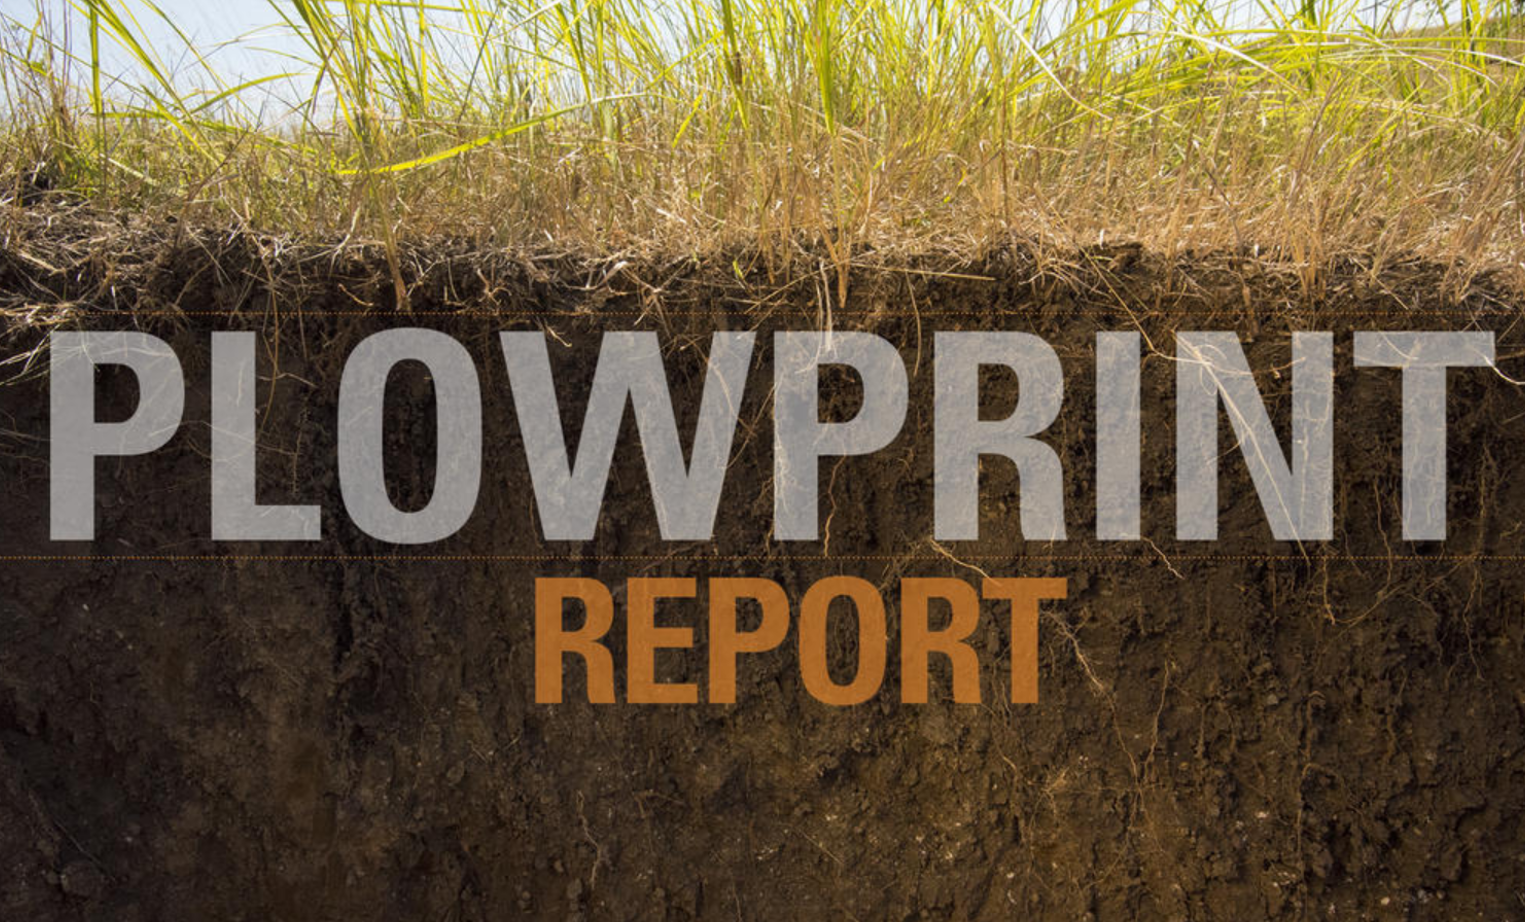 cover page of Plowprint Report from World Wildlife Fund